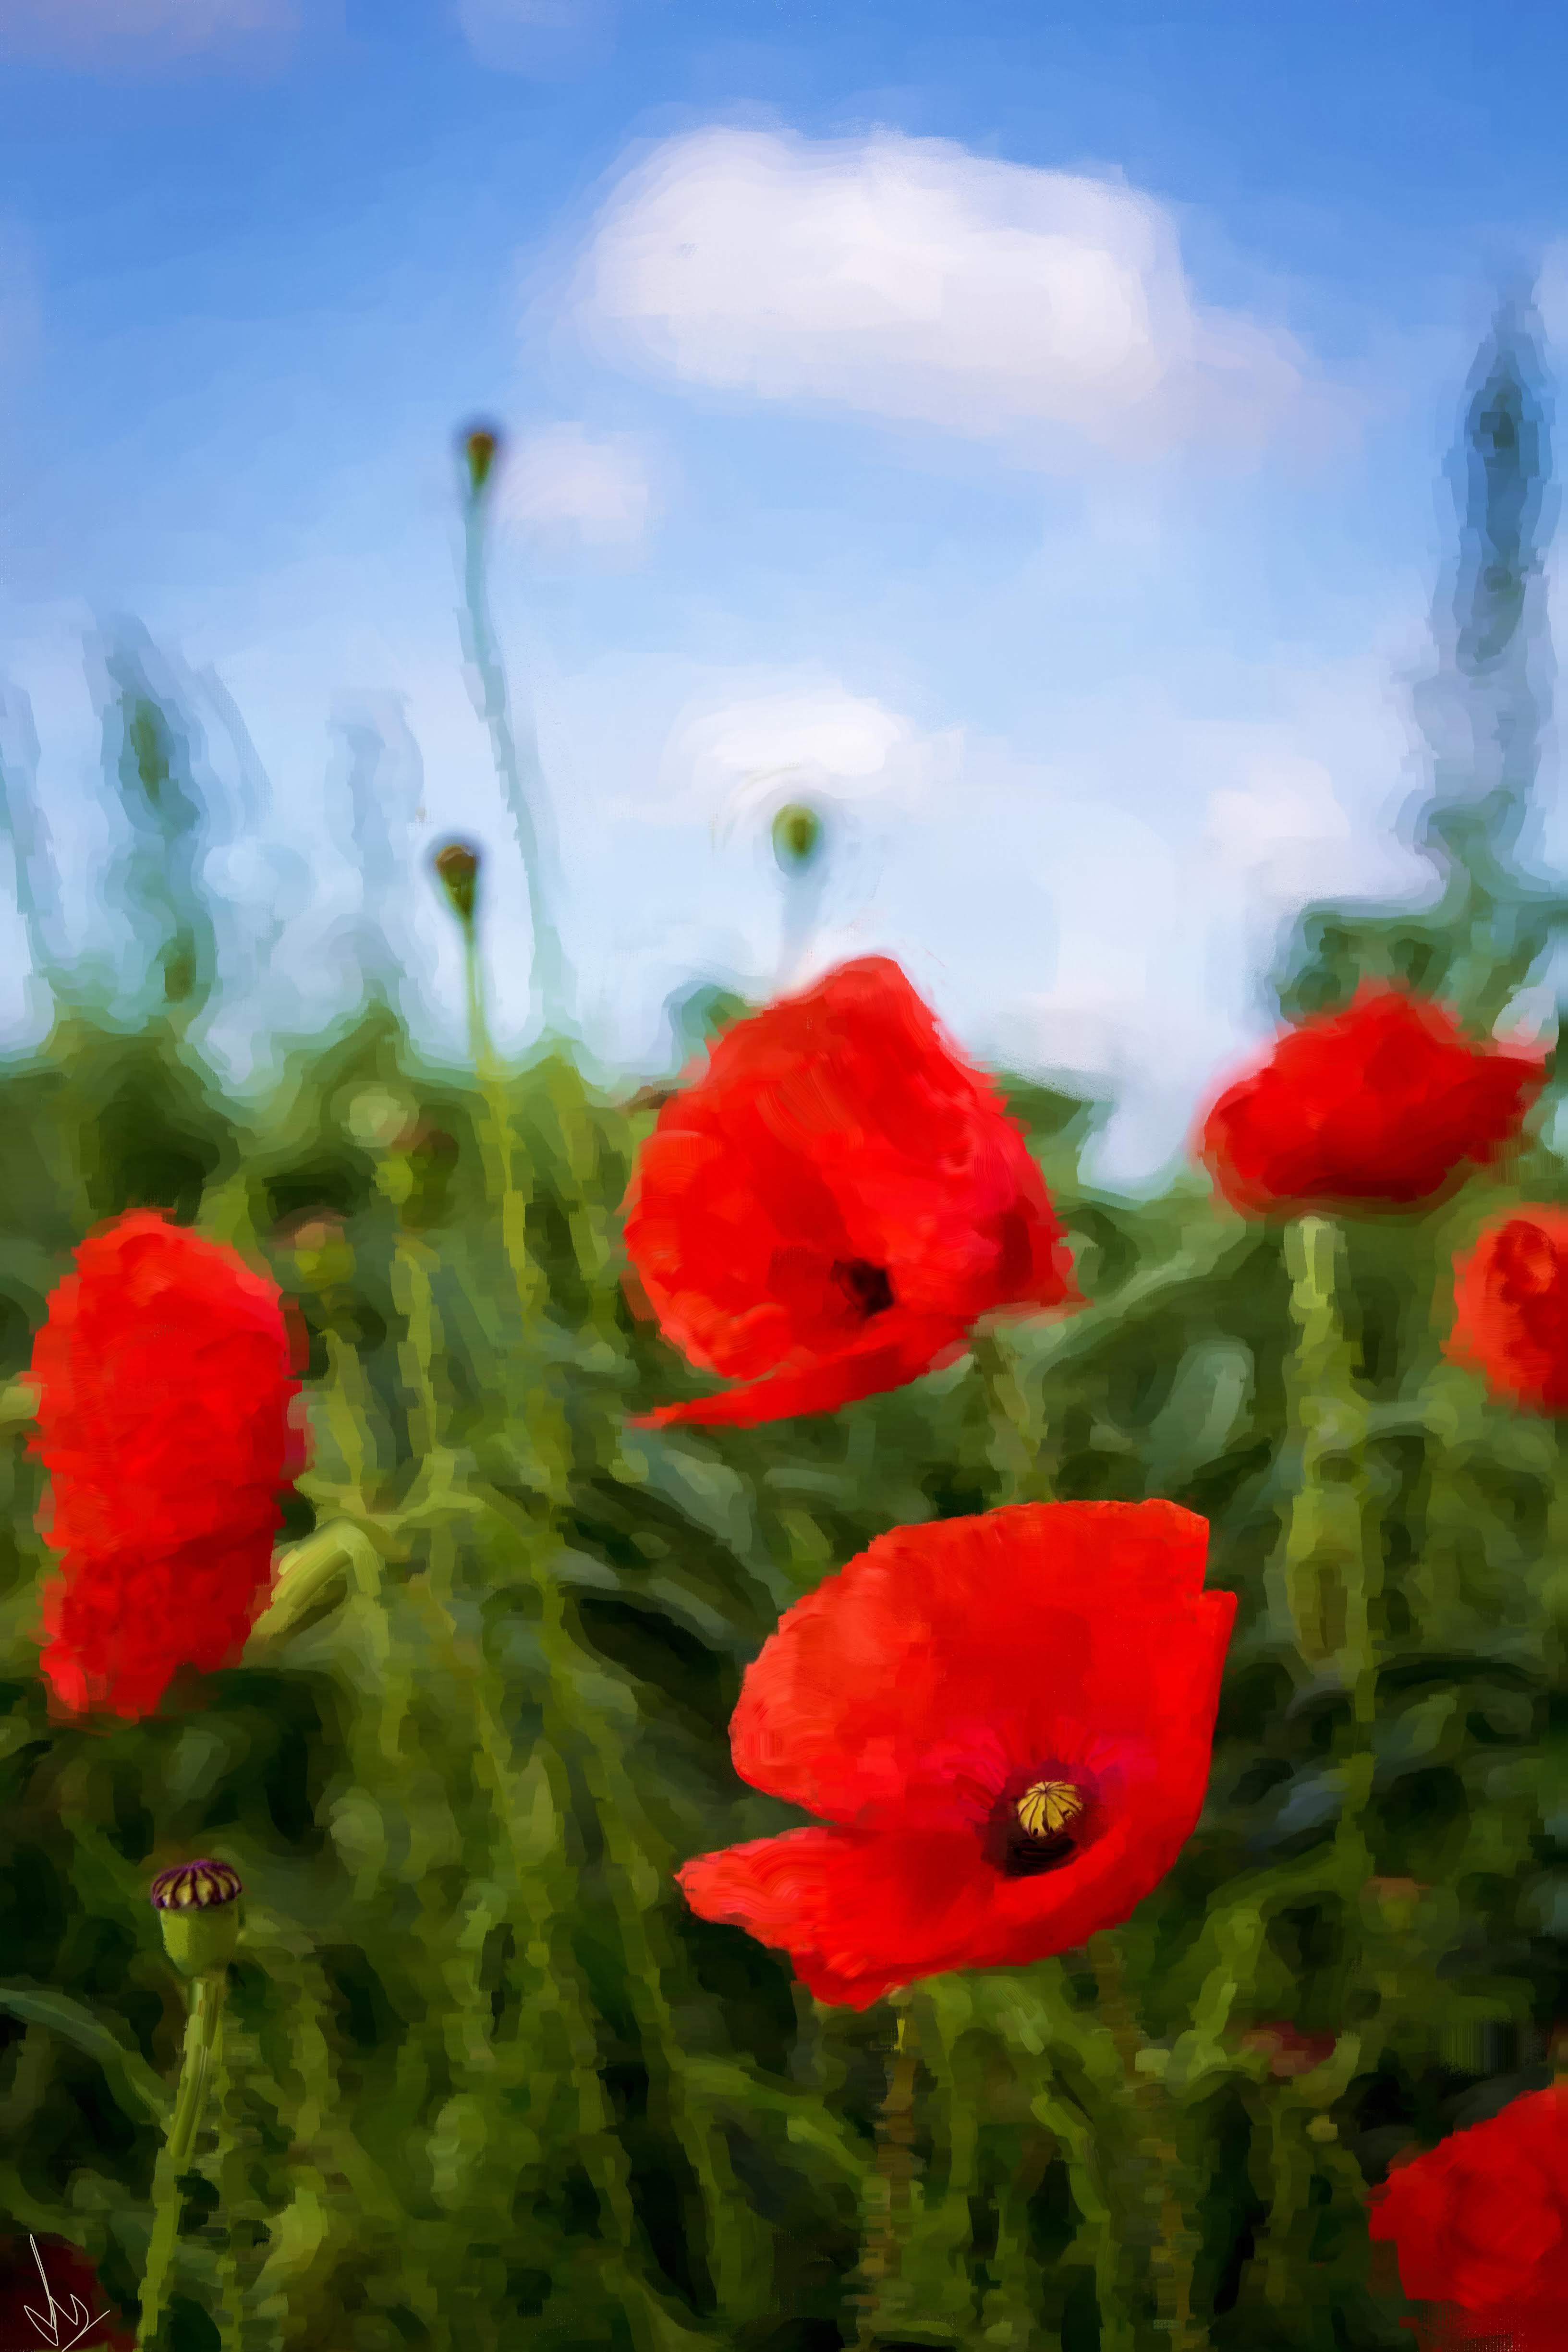 Poppy Fields - A digital painting in remembrance of those who laid their lives in the great war